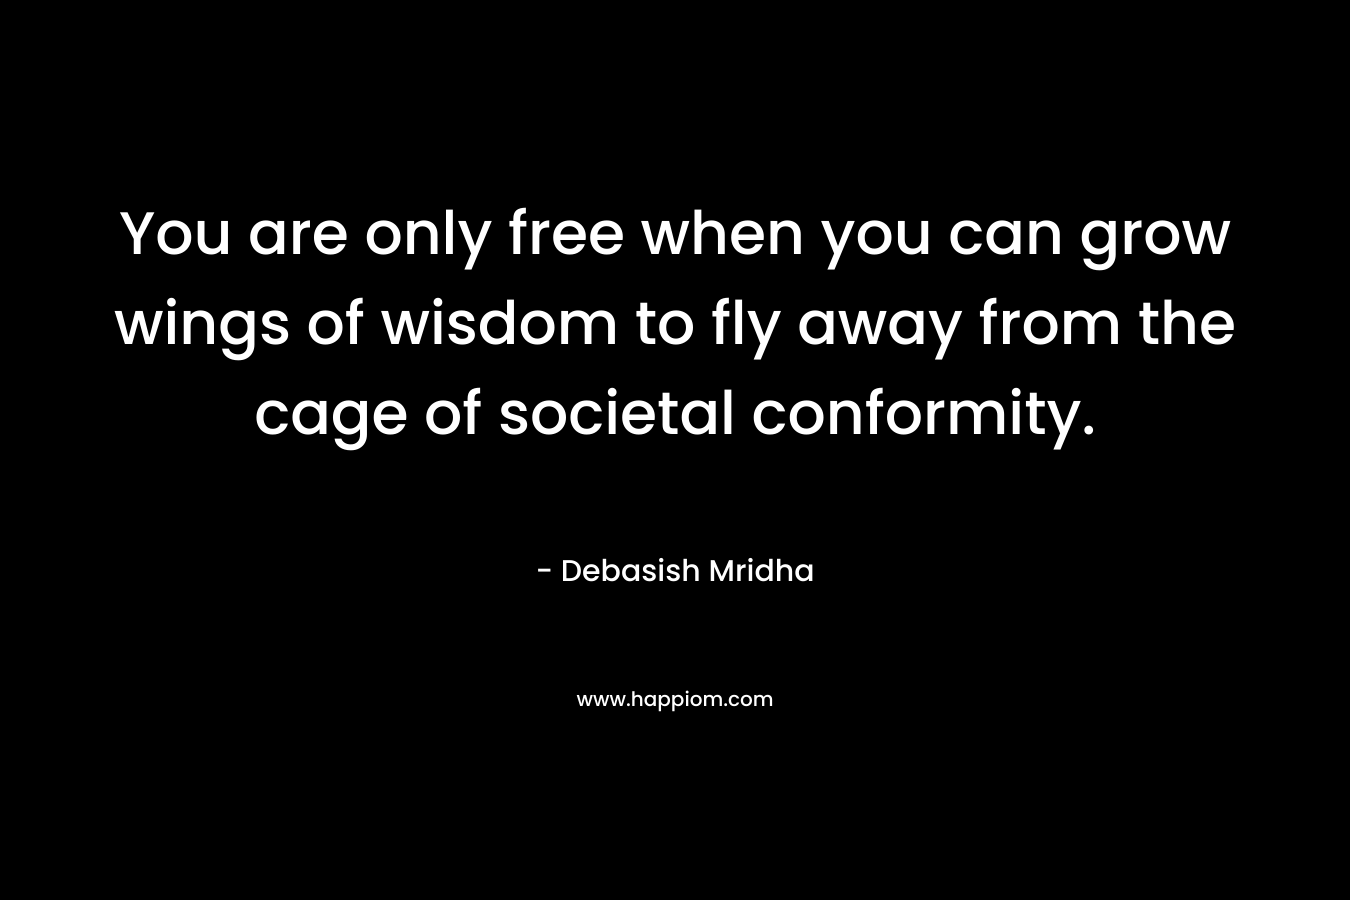 You are only free when you can grow wings of wisdom to fly away from the cage of societal conformity.